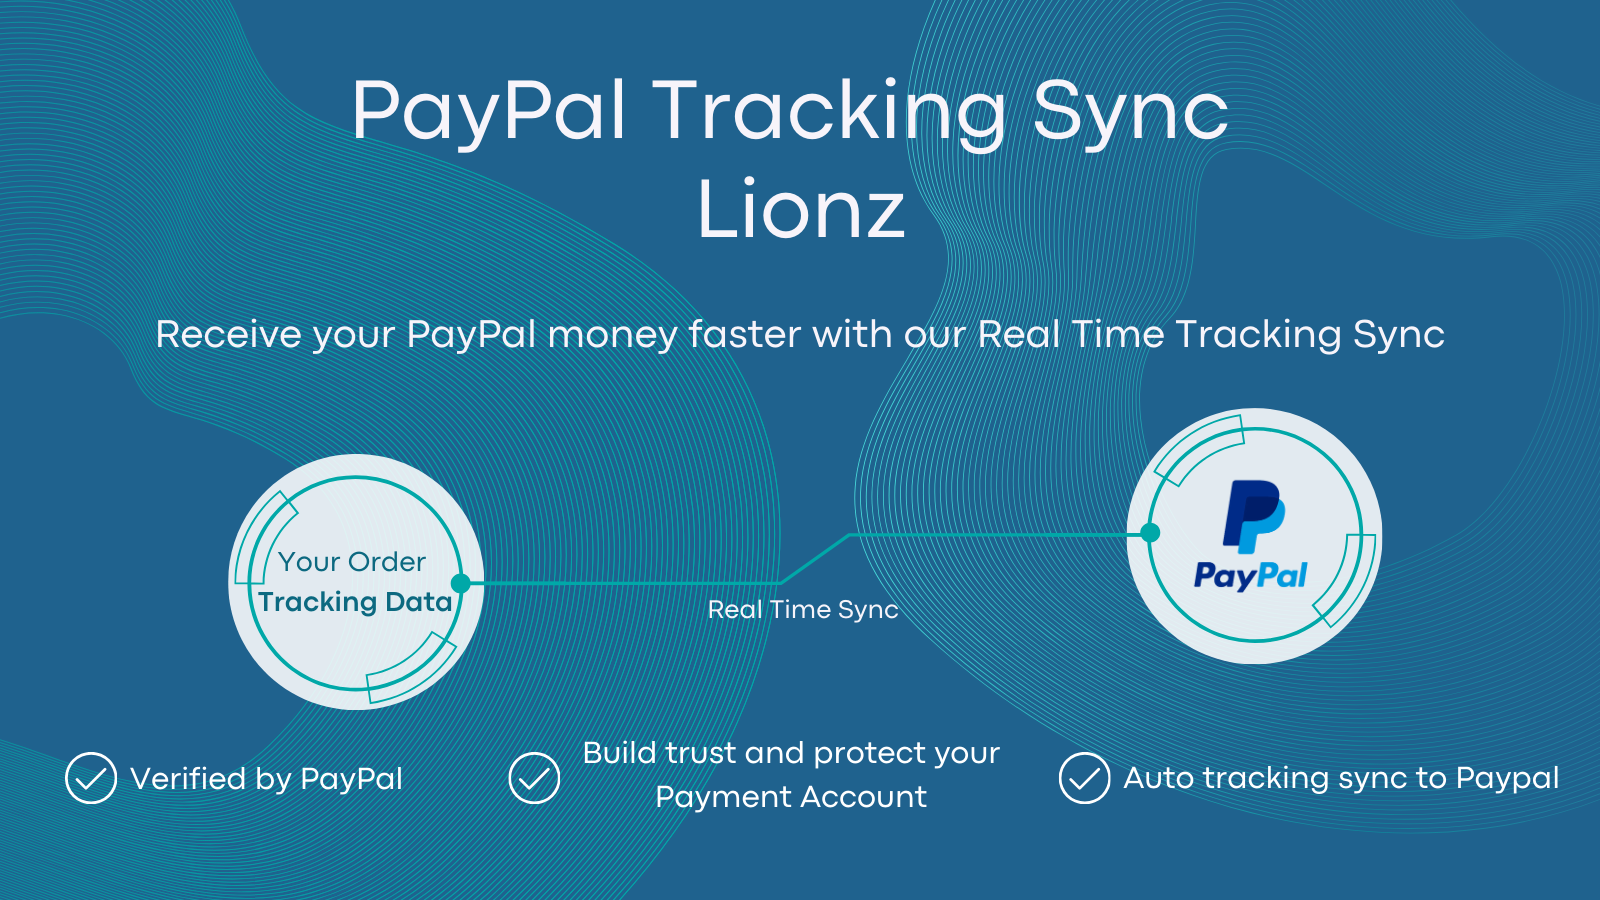 PayPal Tracking Sync